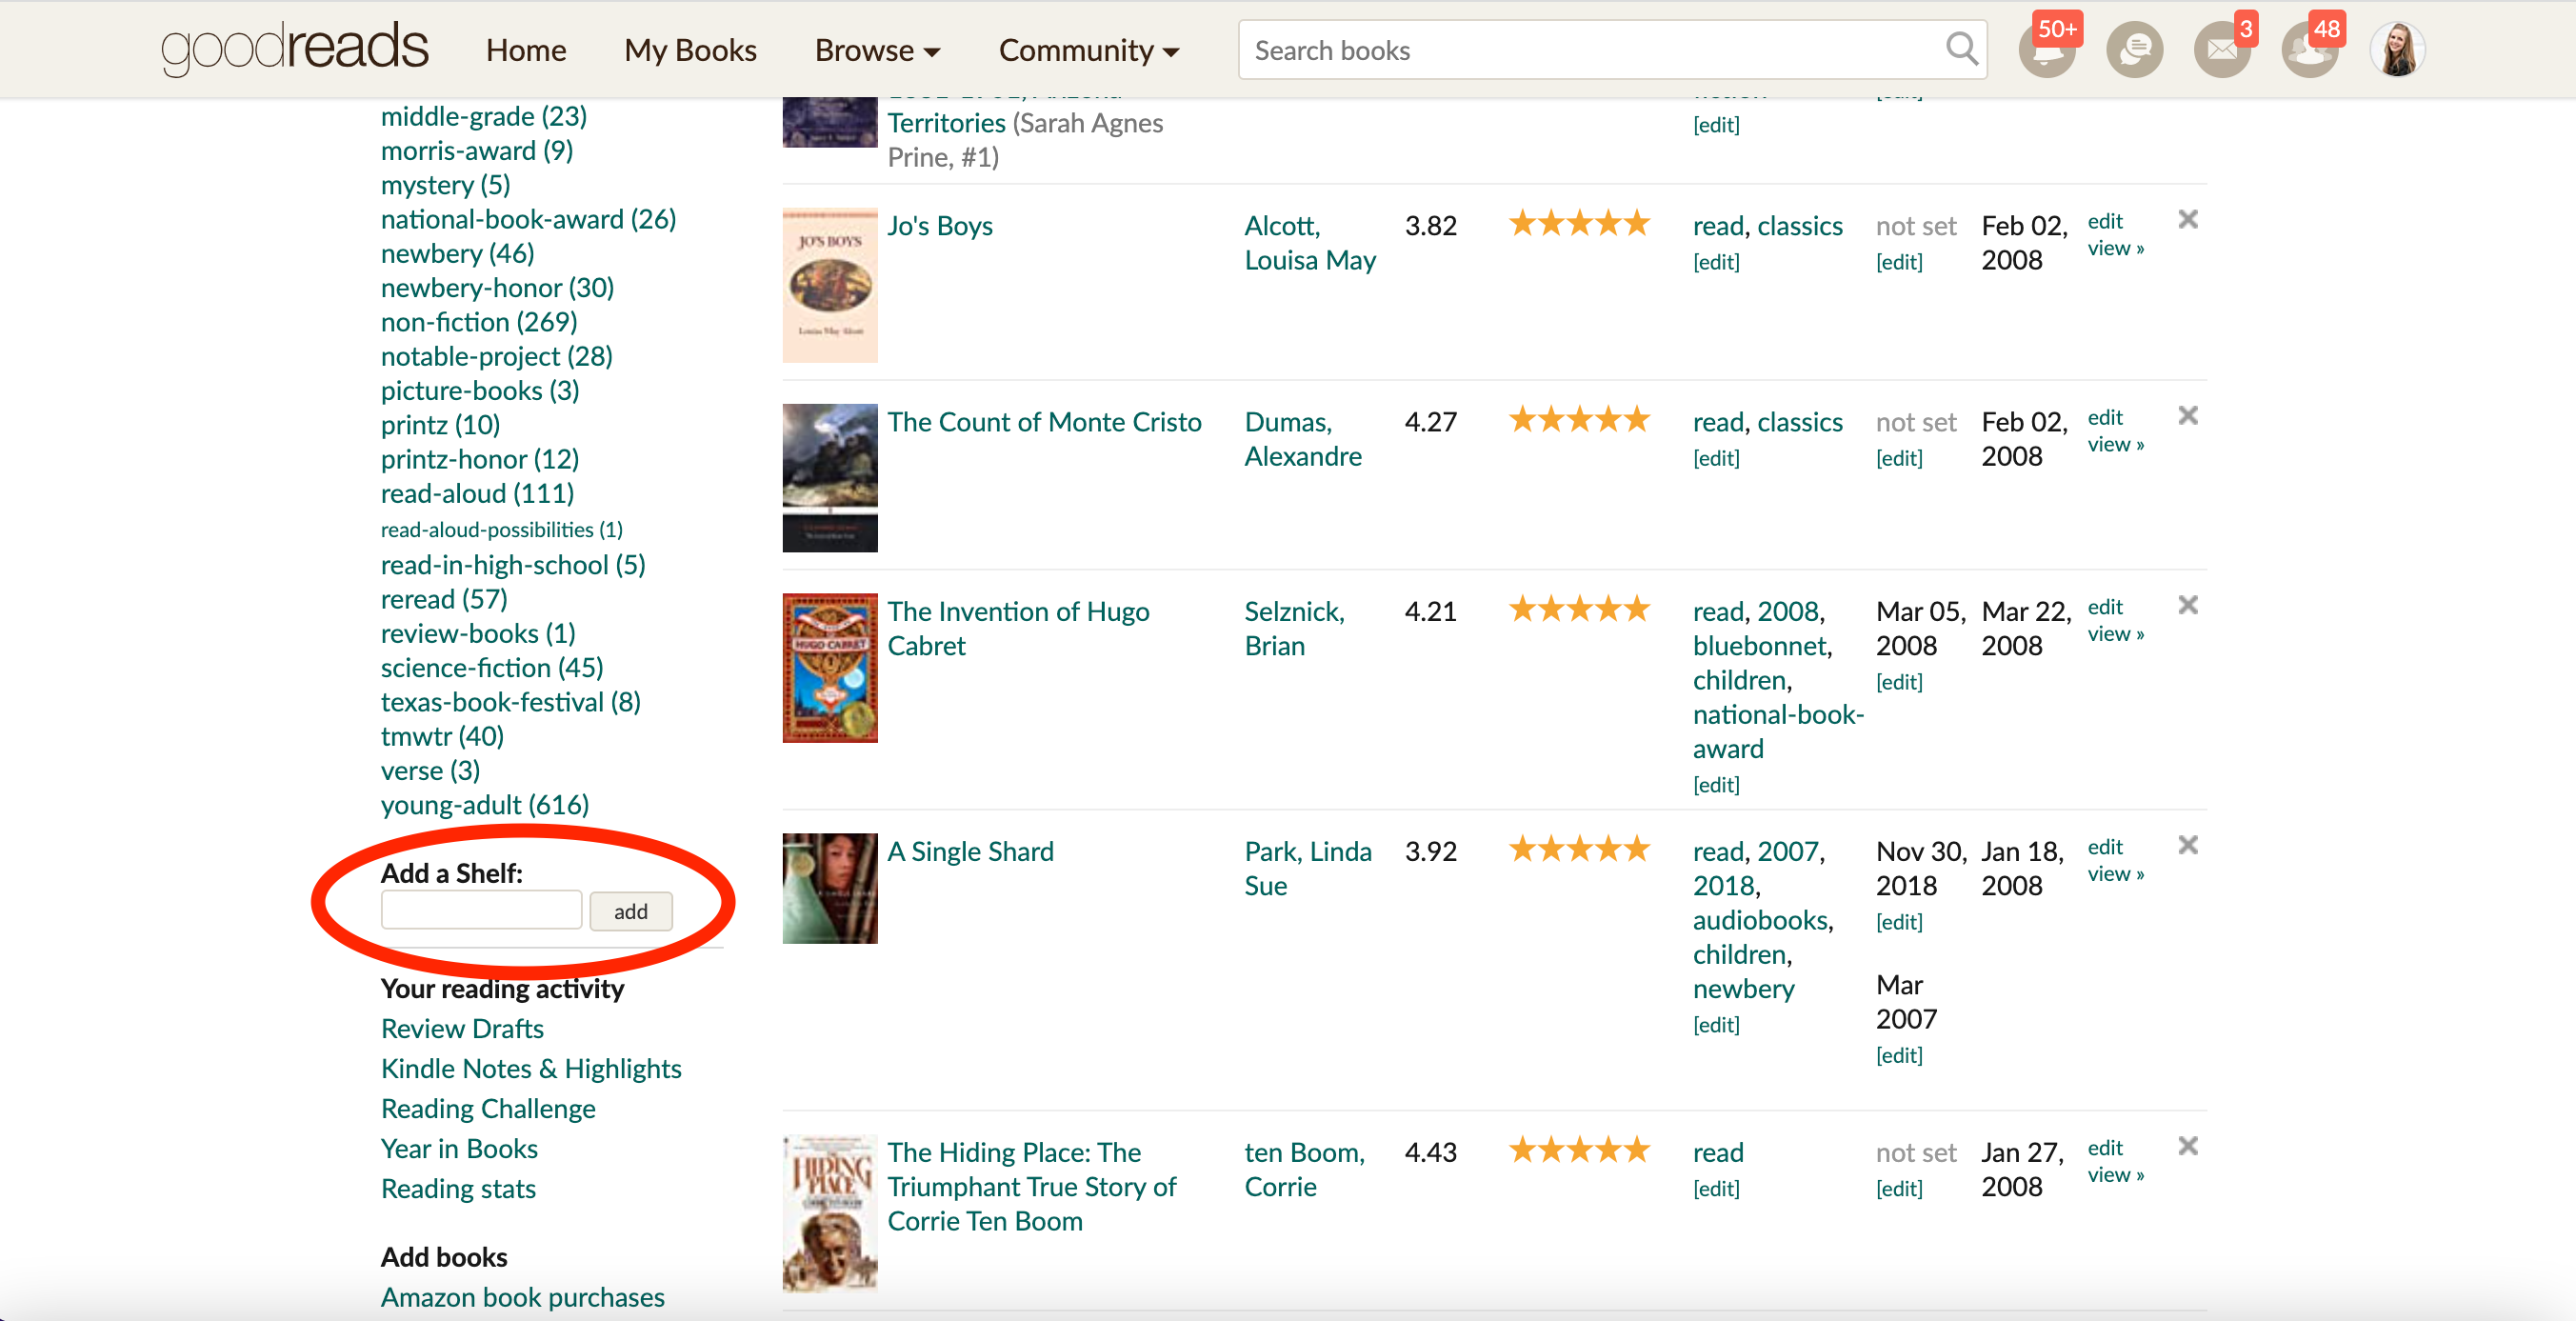 how to add a shelf on Goodreads